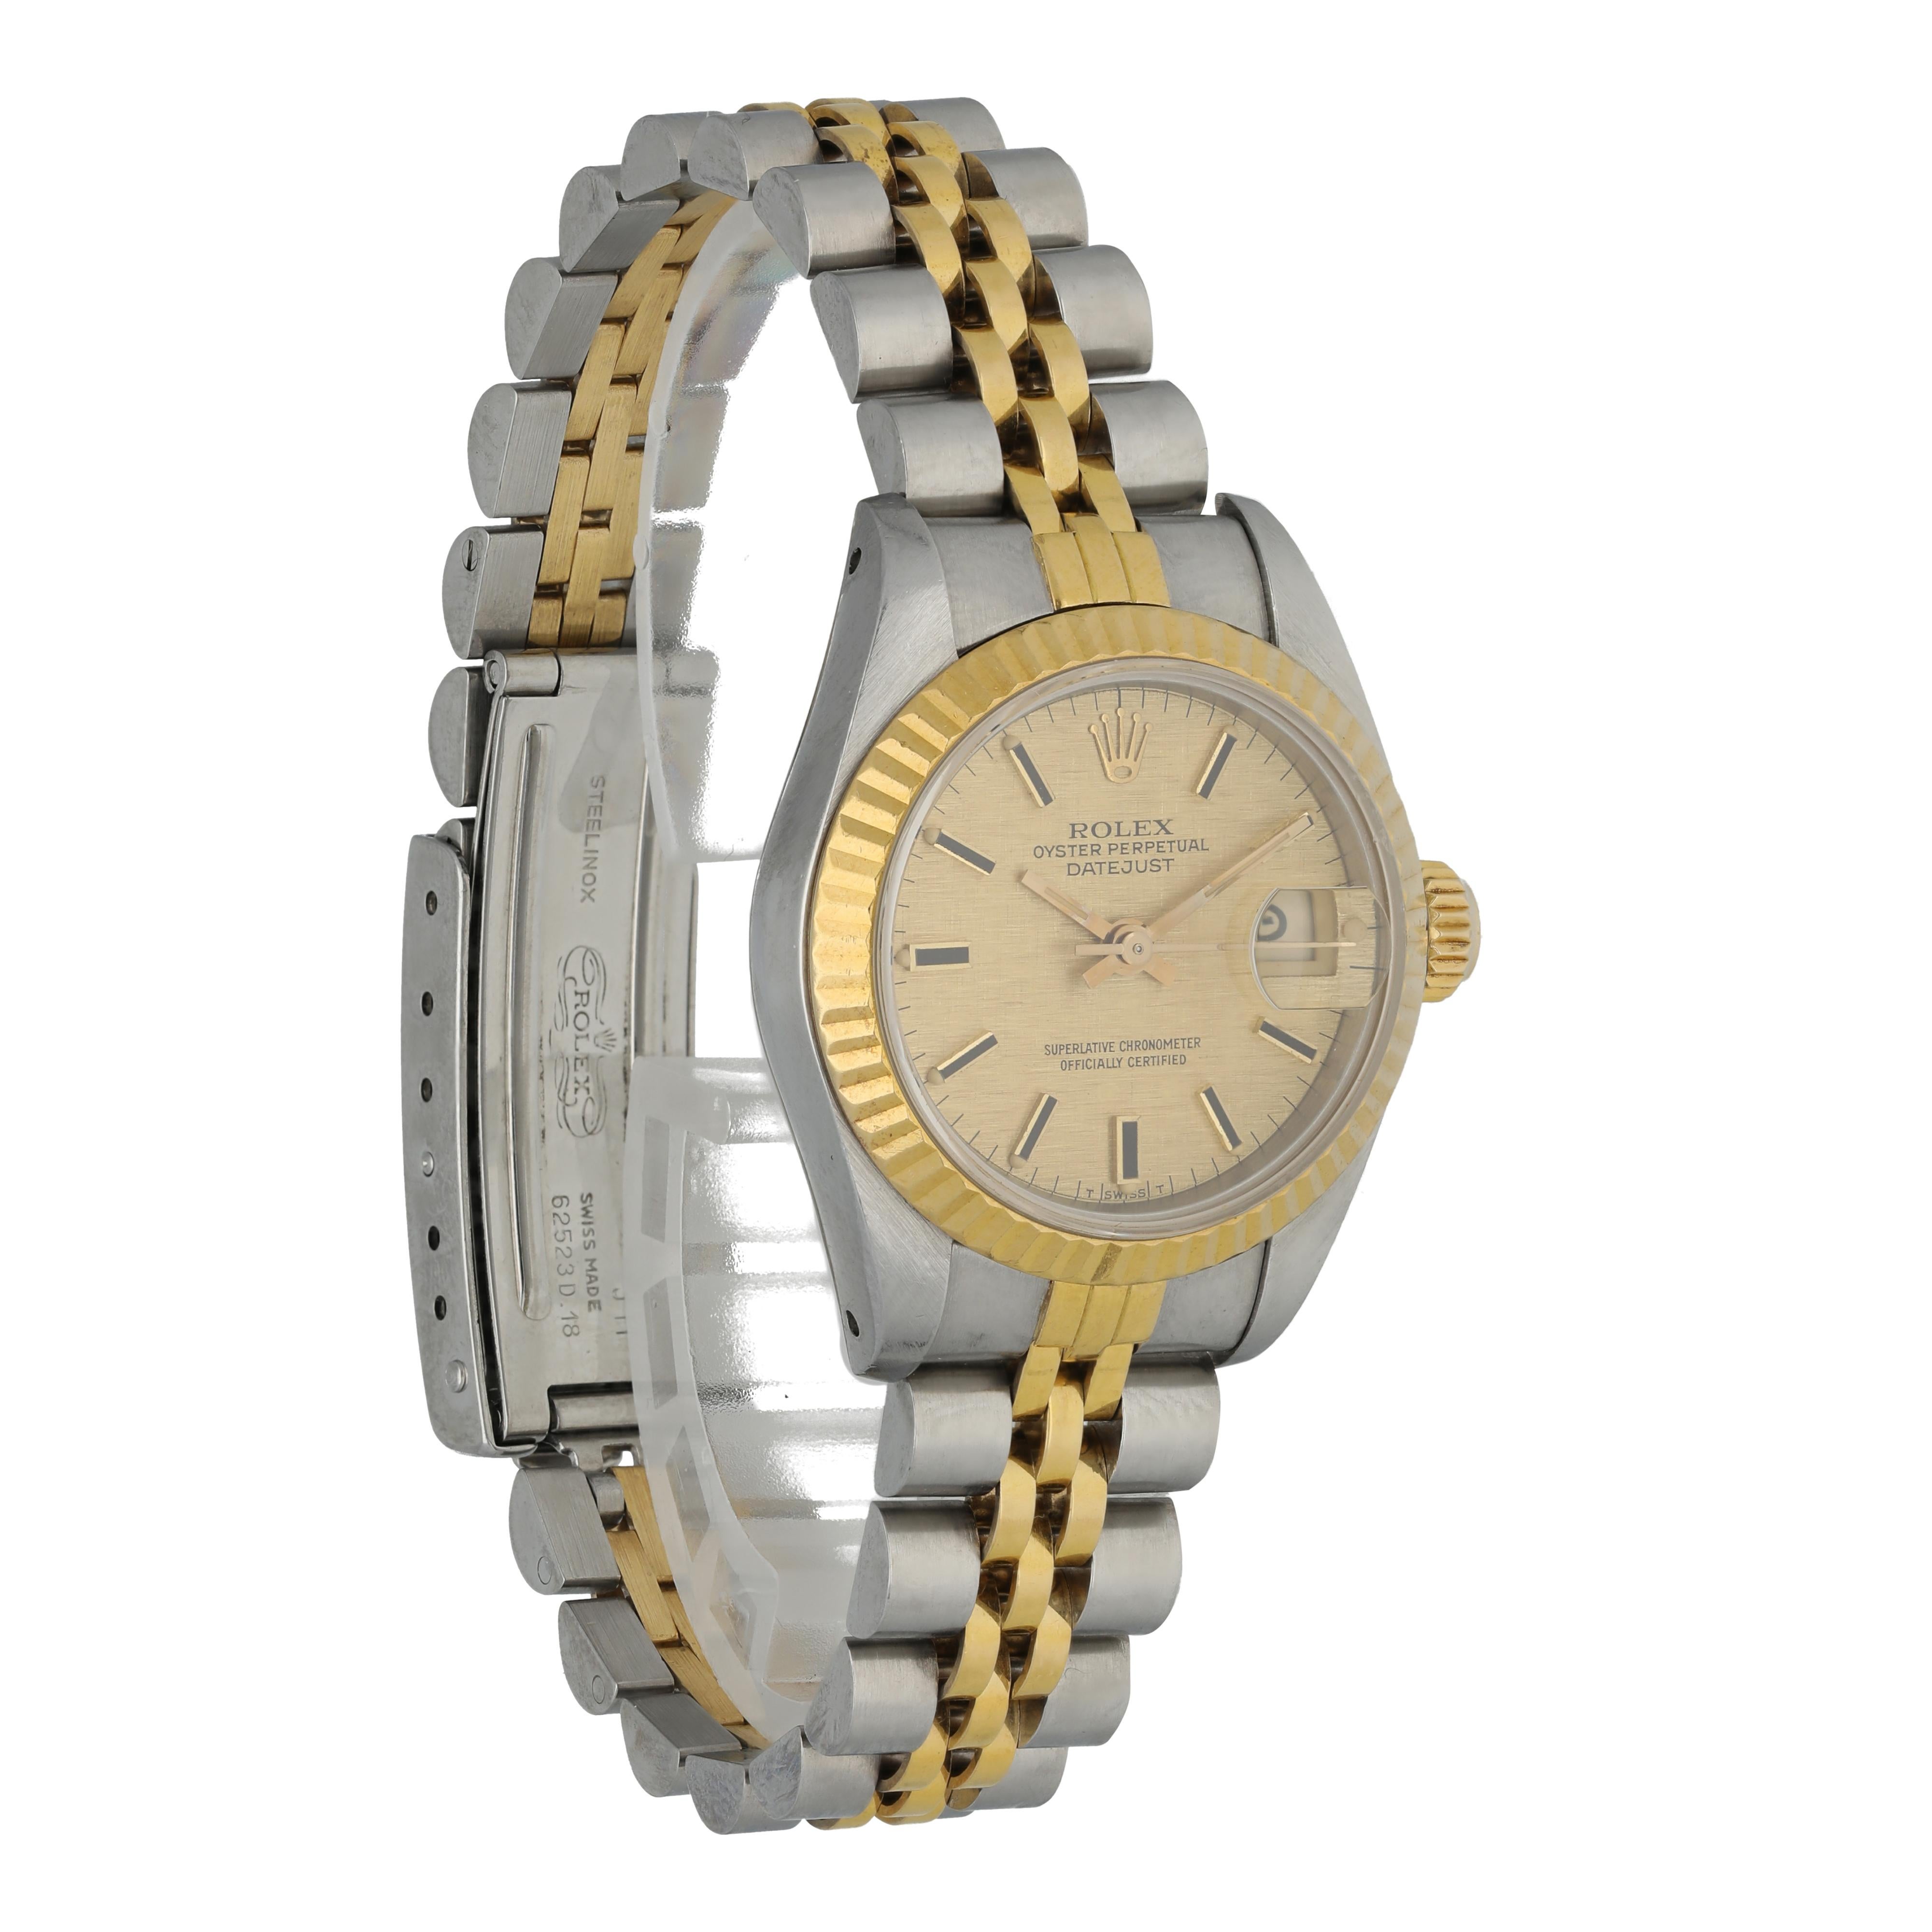 Rolex Datejust 69173 Linen Dial Ladies Watch Box Papers In Excellent Condition For Sale In New York, NY